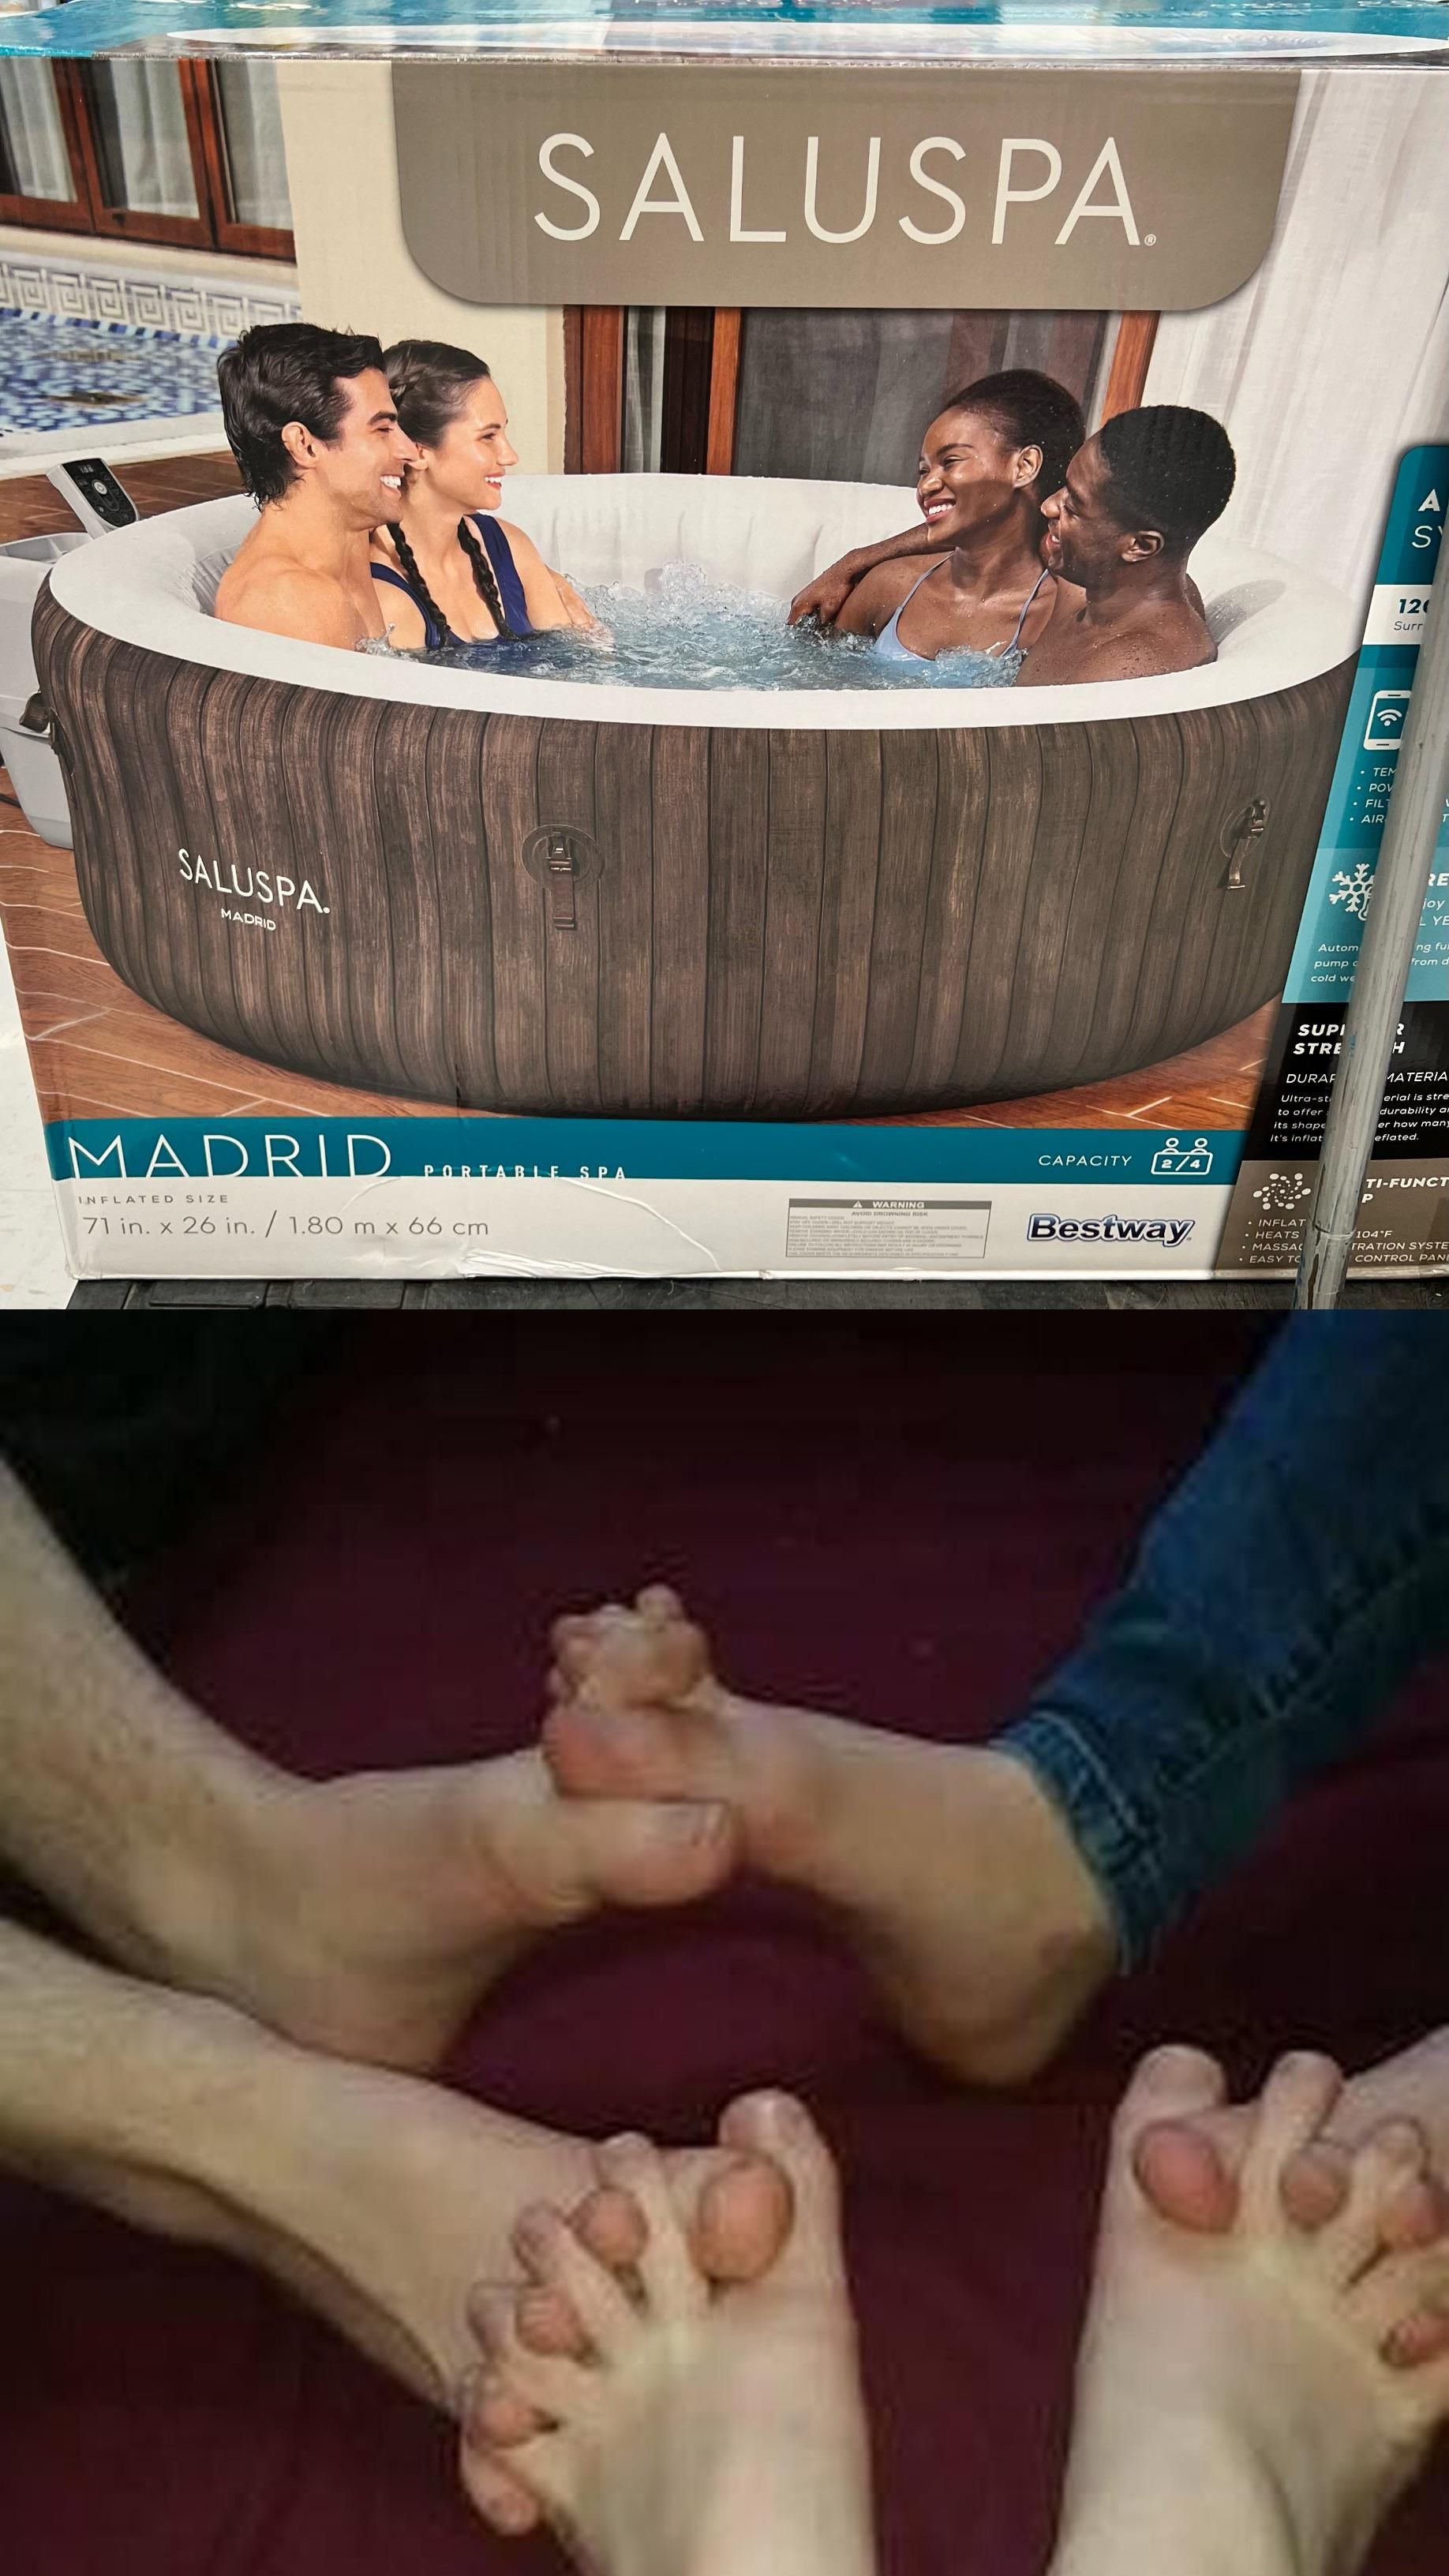 Saw this hot tub at Walmart, and I instantly thought this would be the only way they fit